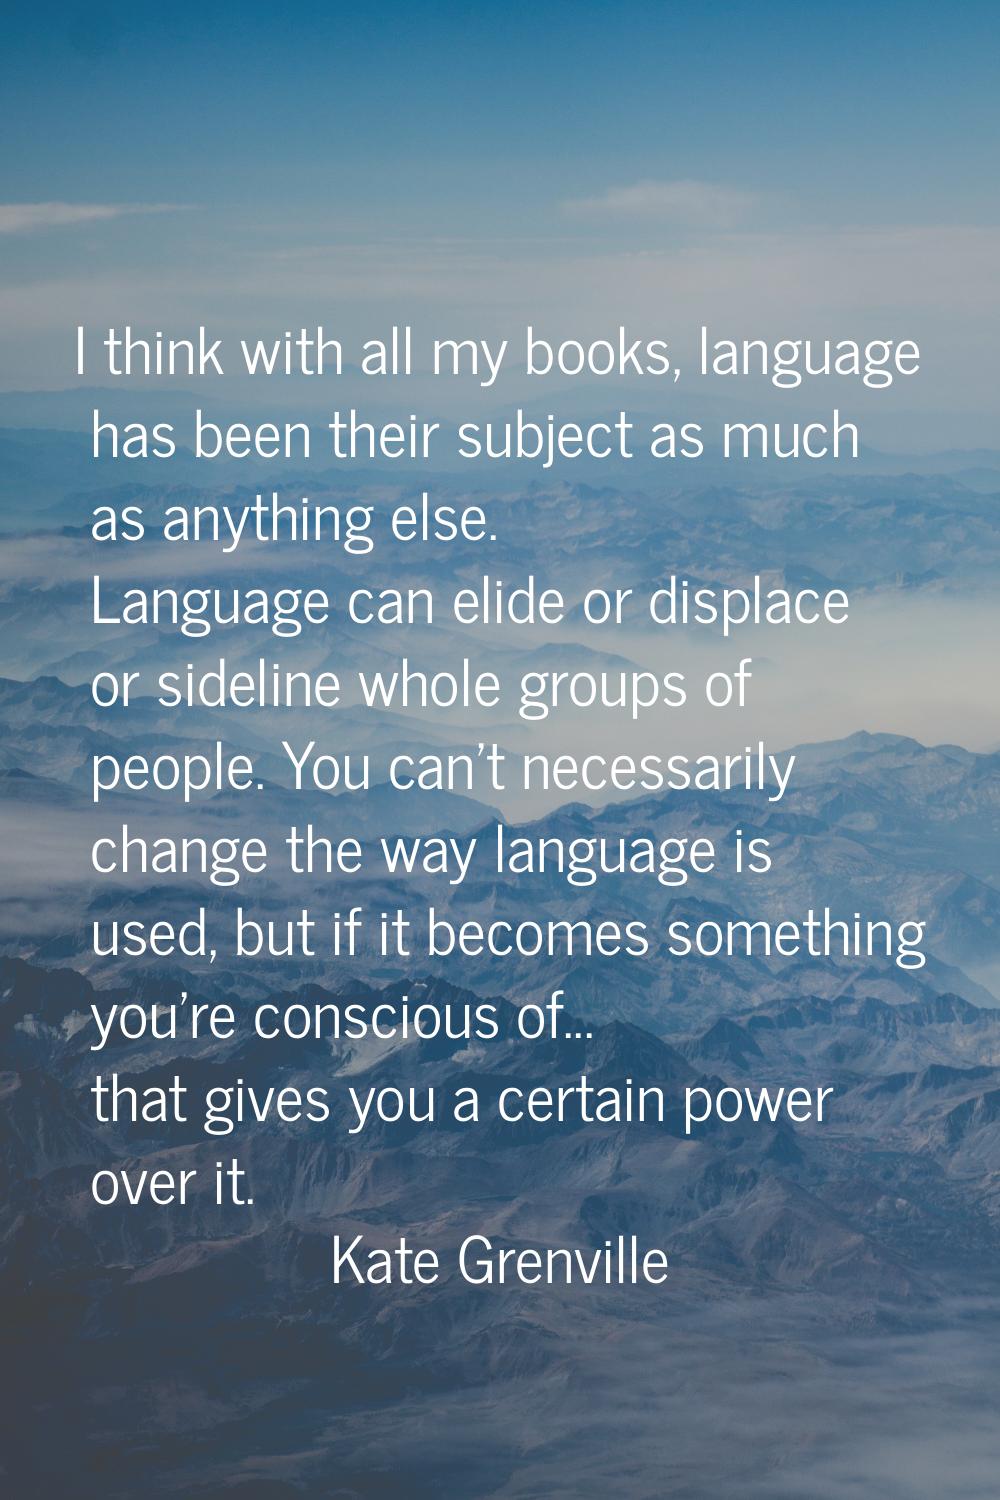 I think with all my books, language has been their subject as much as anything else. Language can e